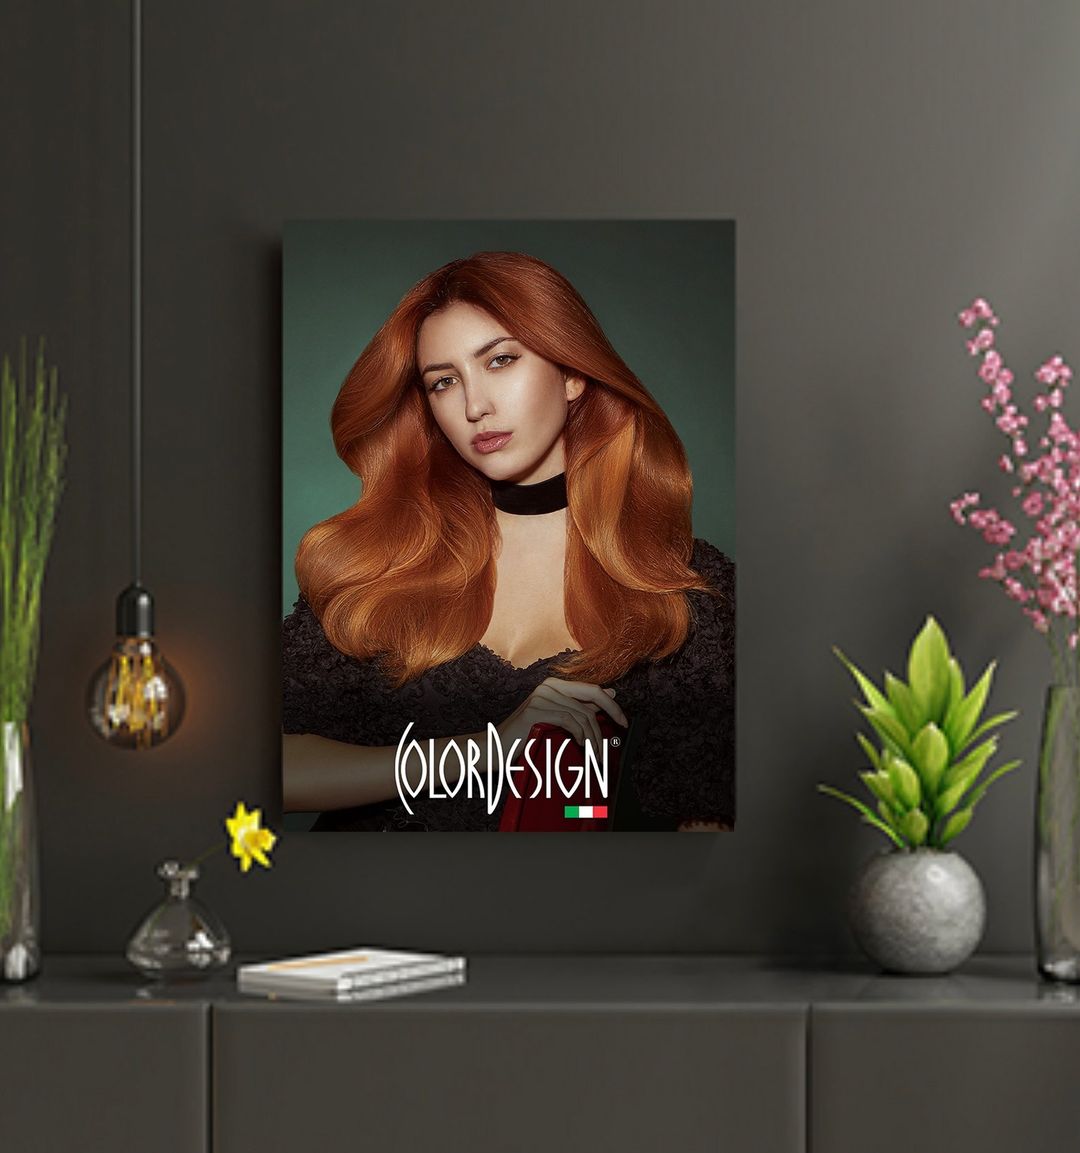 ColorDesign Hair Color Launches Aperol-Inspired Box Collection - The Hottest Hair Colors This Year